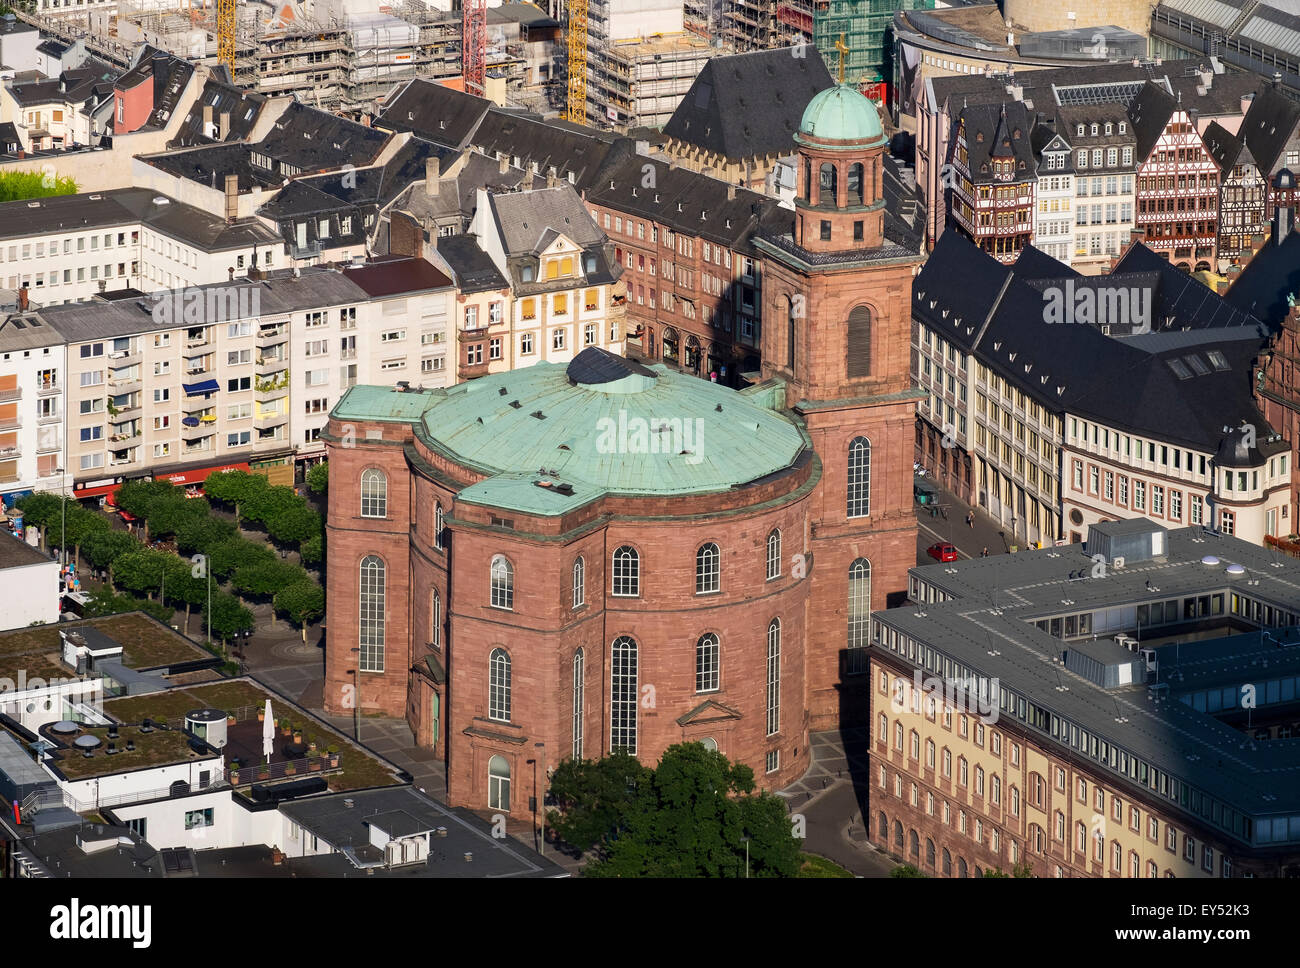 Paulskirche or St. Paul's Church, view from the Main Tower, Frankfurt am Main, Hesse, Germany Stock Photo